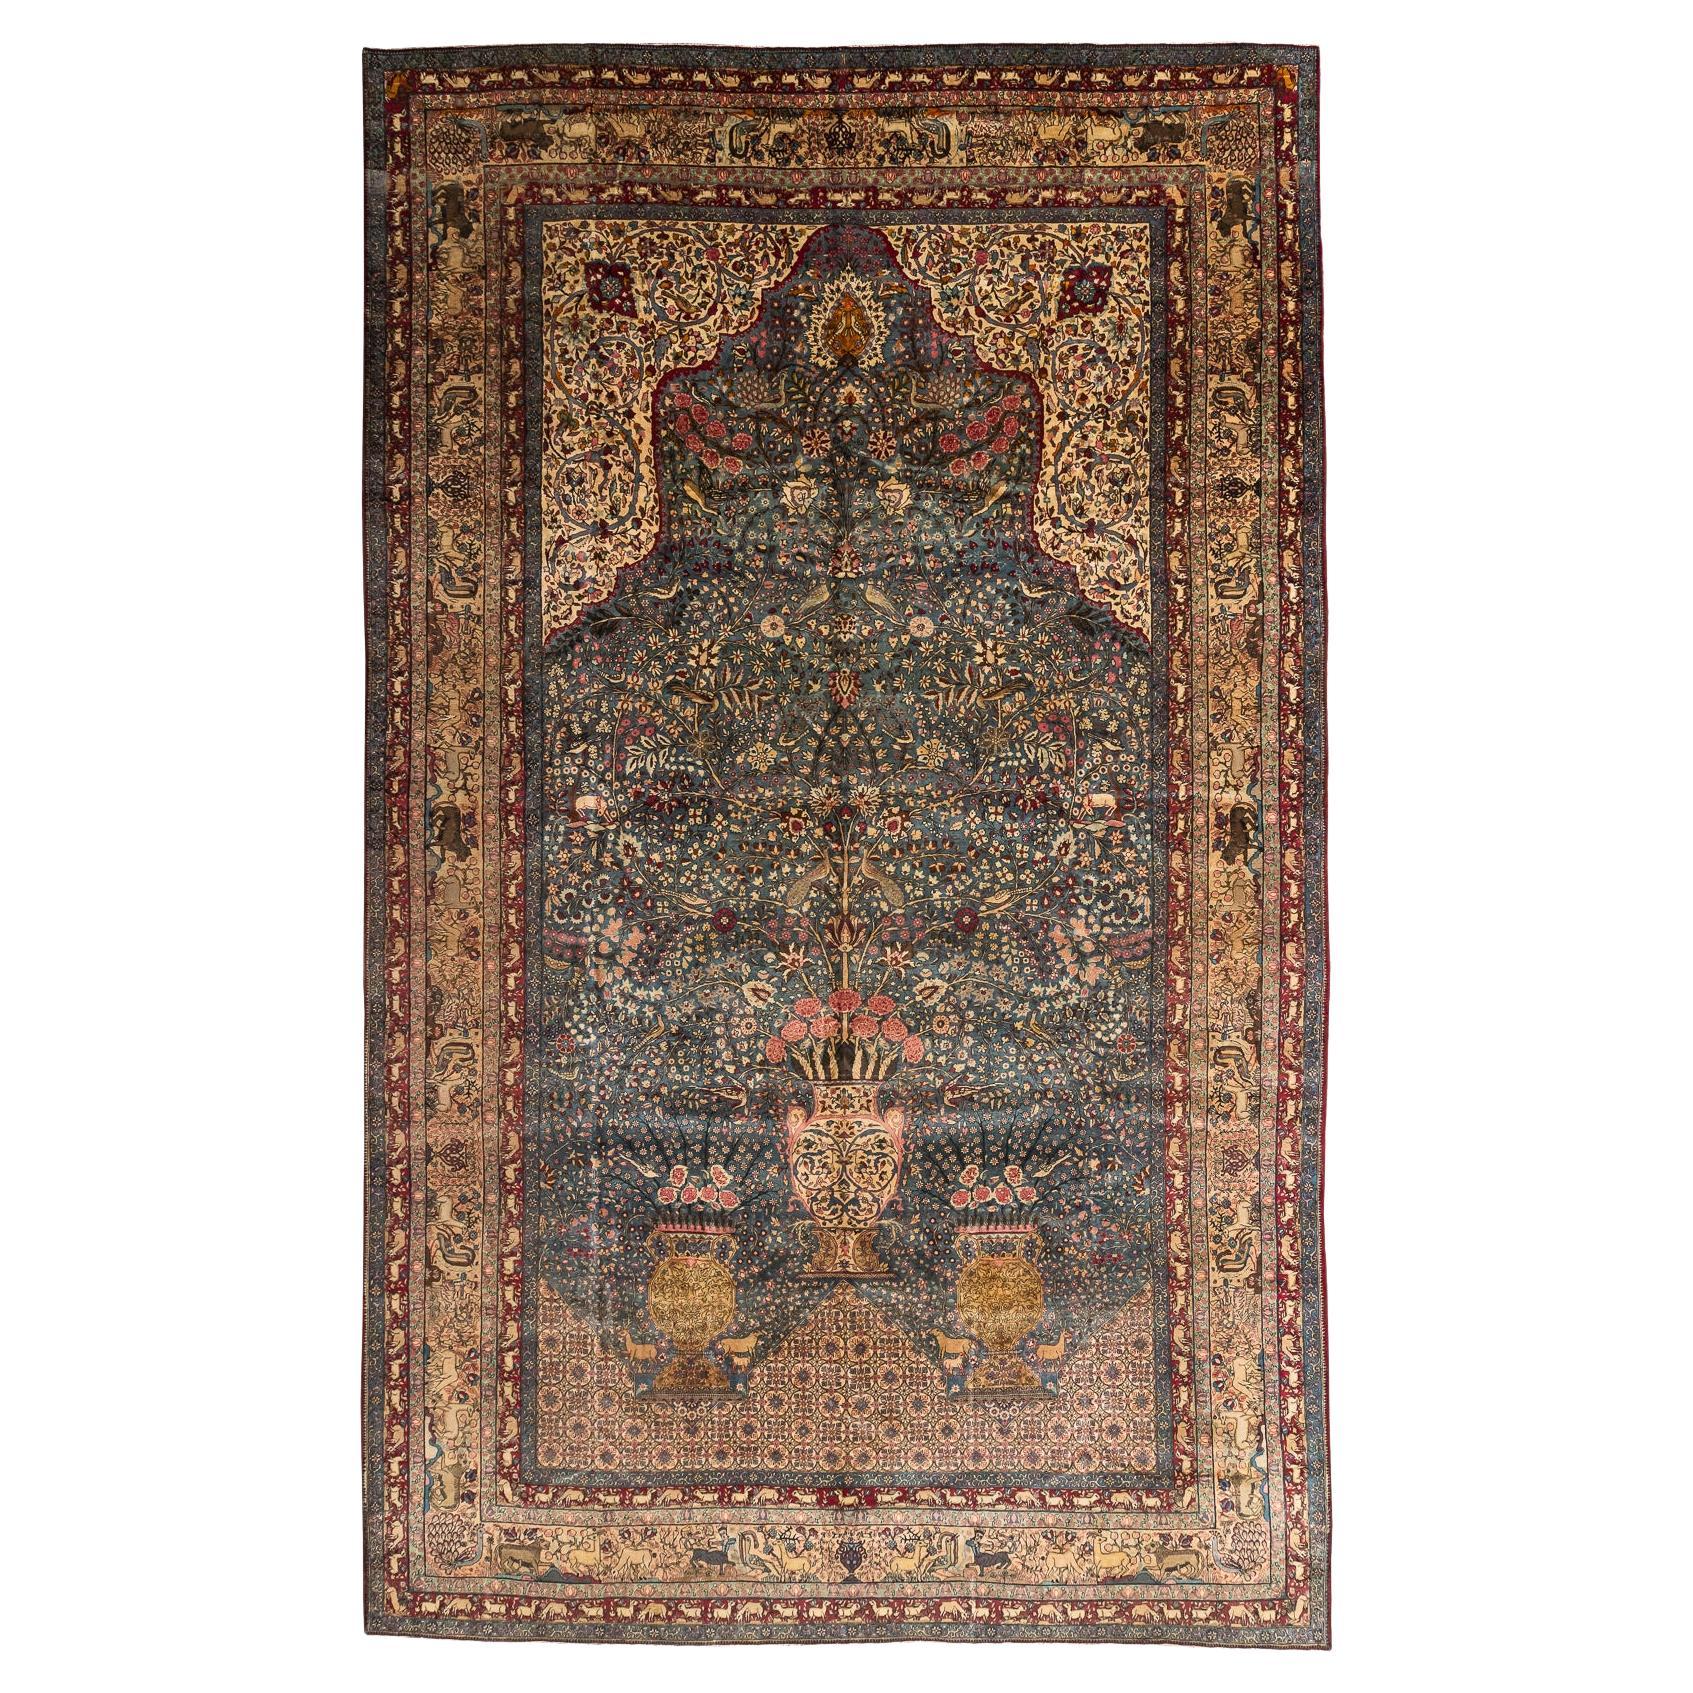 Kerman – South Persia

A magnificent Kerman rug with a paradise design of palatial proportions. It features infinite birds and animals among a profusion of trees, flowering plants, and three large vases with roses. This Kerman has a vibrant colour